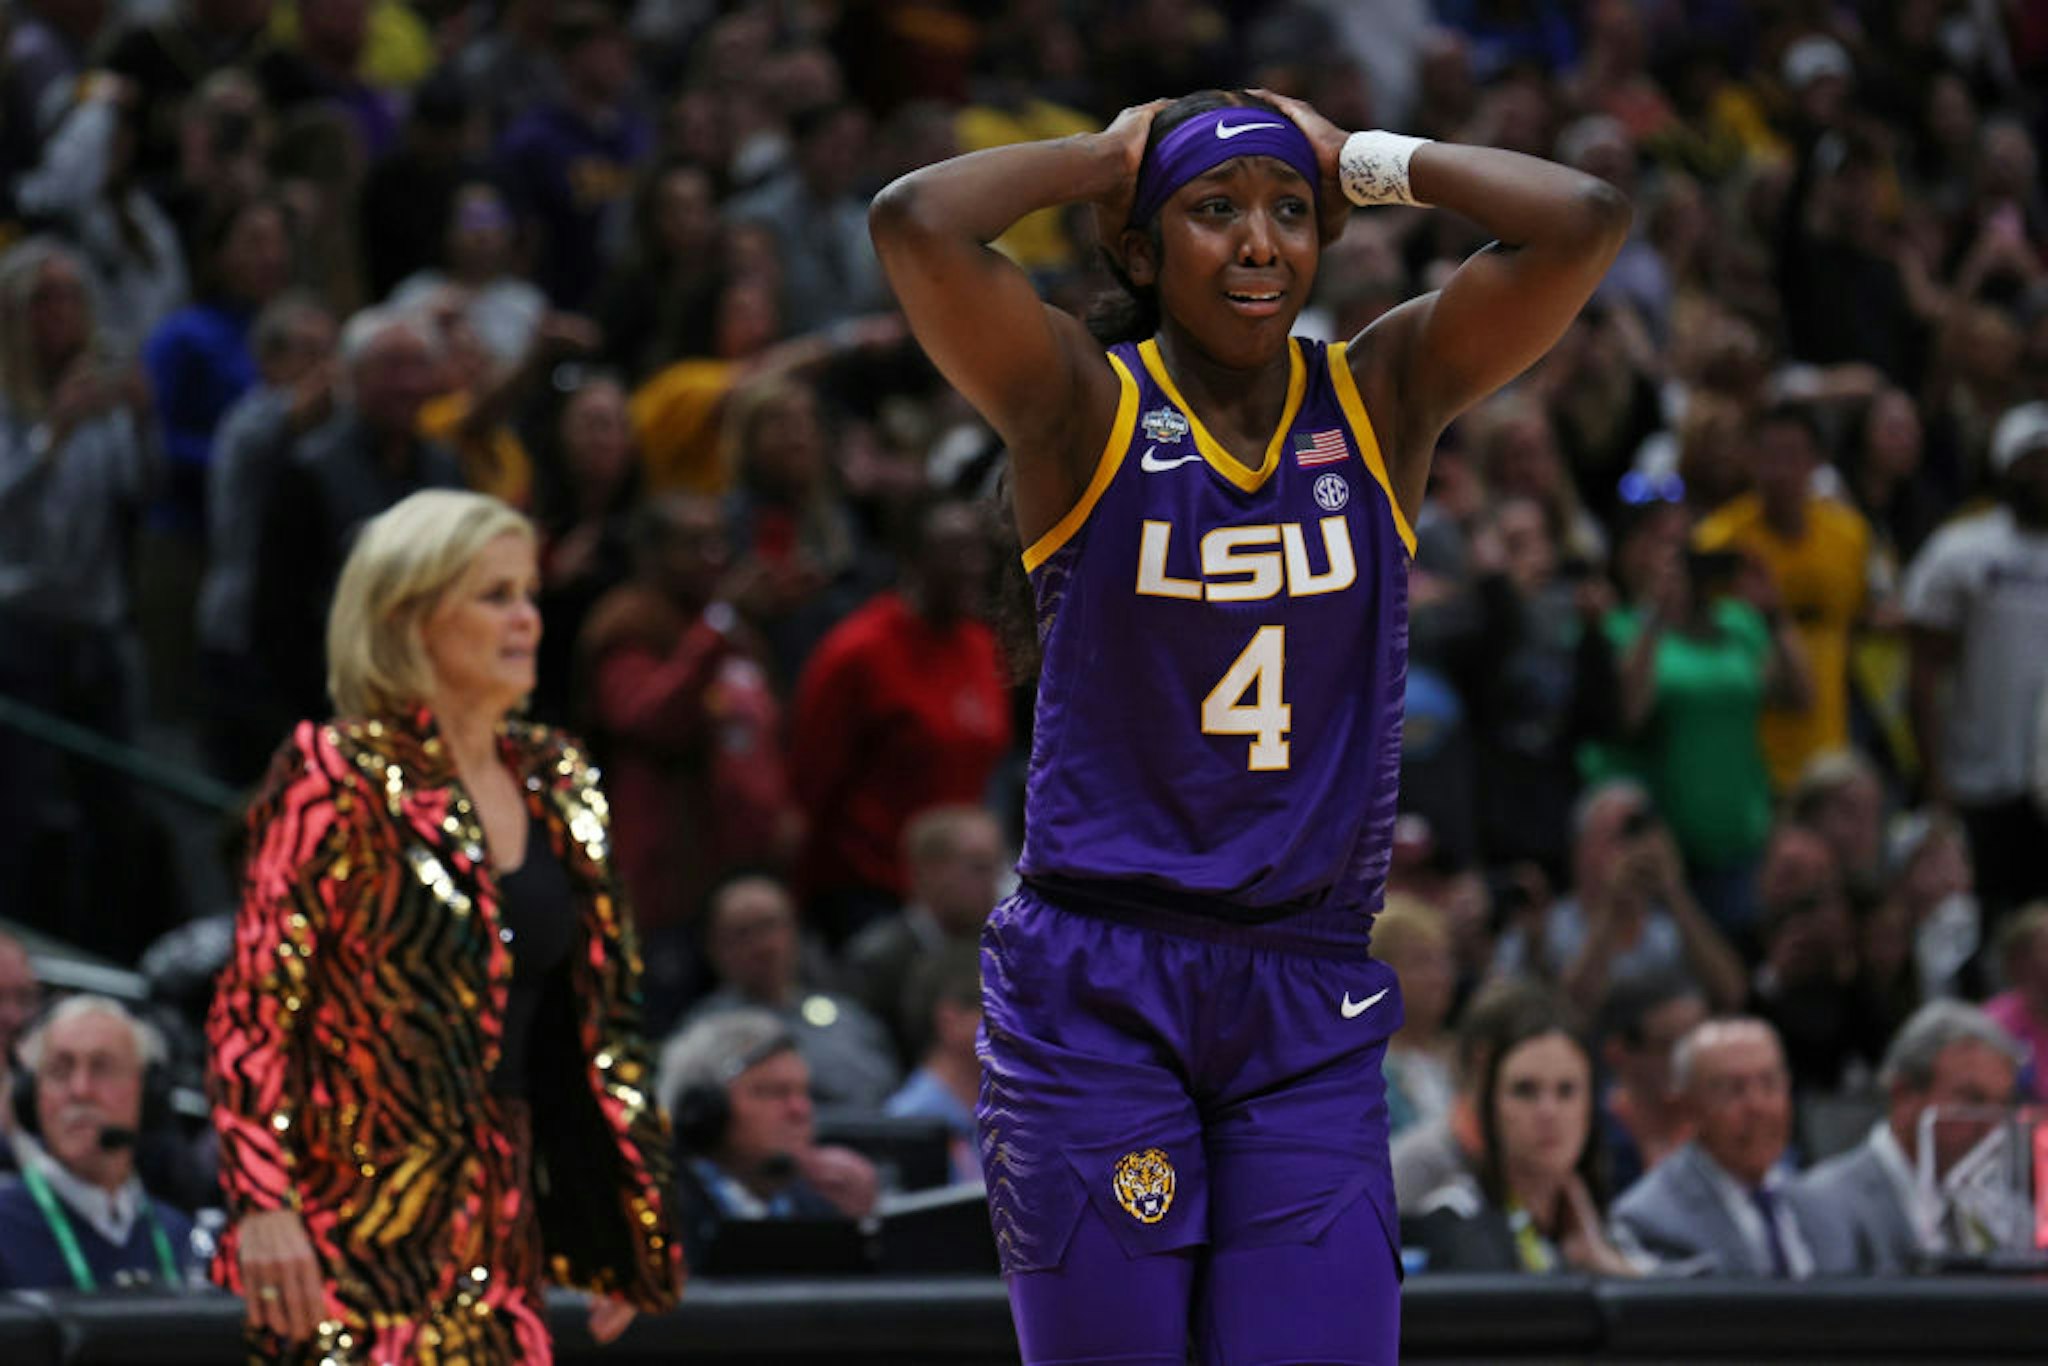 DALLAS, TEXAS - APRIL 02: Flau'jae Johnson #4 of the LSU Lady Tigers reacts during the fourth quarter against the Iowa Hawkeyes during the 2023 NCAA Women's Basketball Tournament championship game at American Airlines Center on April 02, 2023 in Dallas, Texas. (Photo by Tom Pennington/Getty Images)